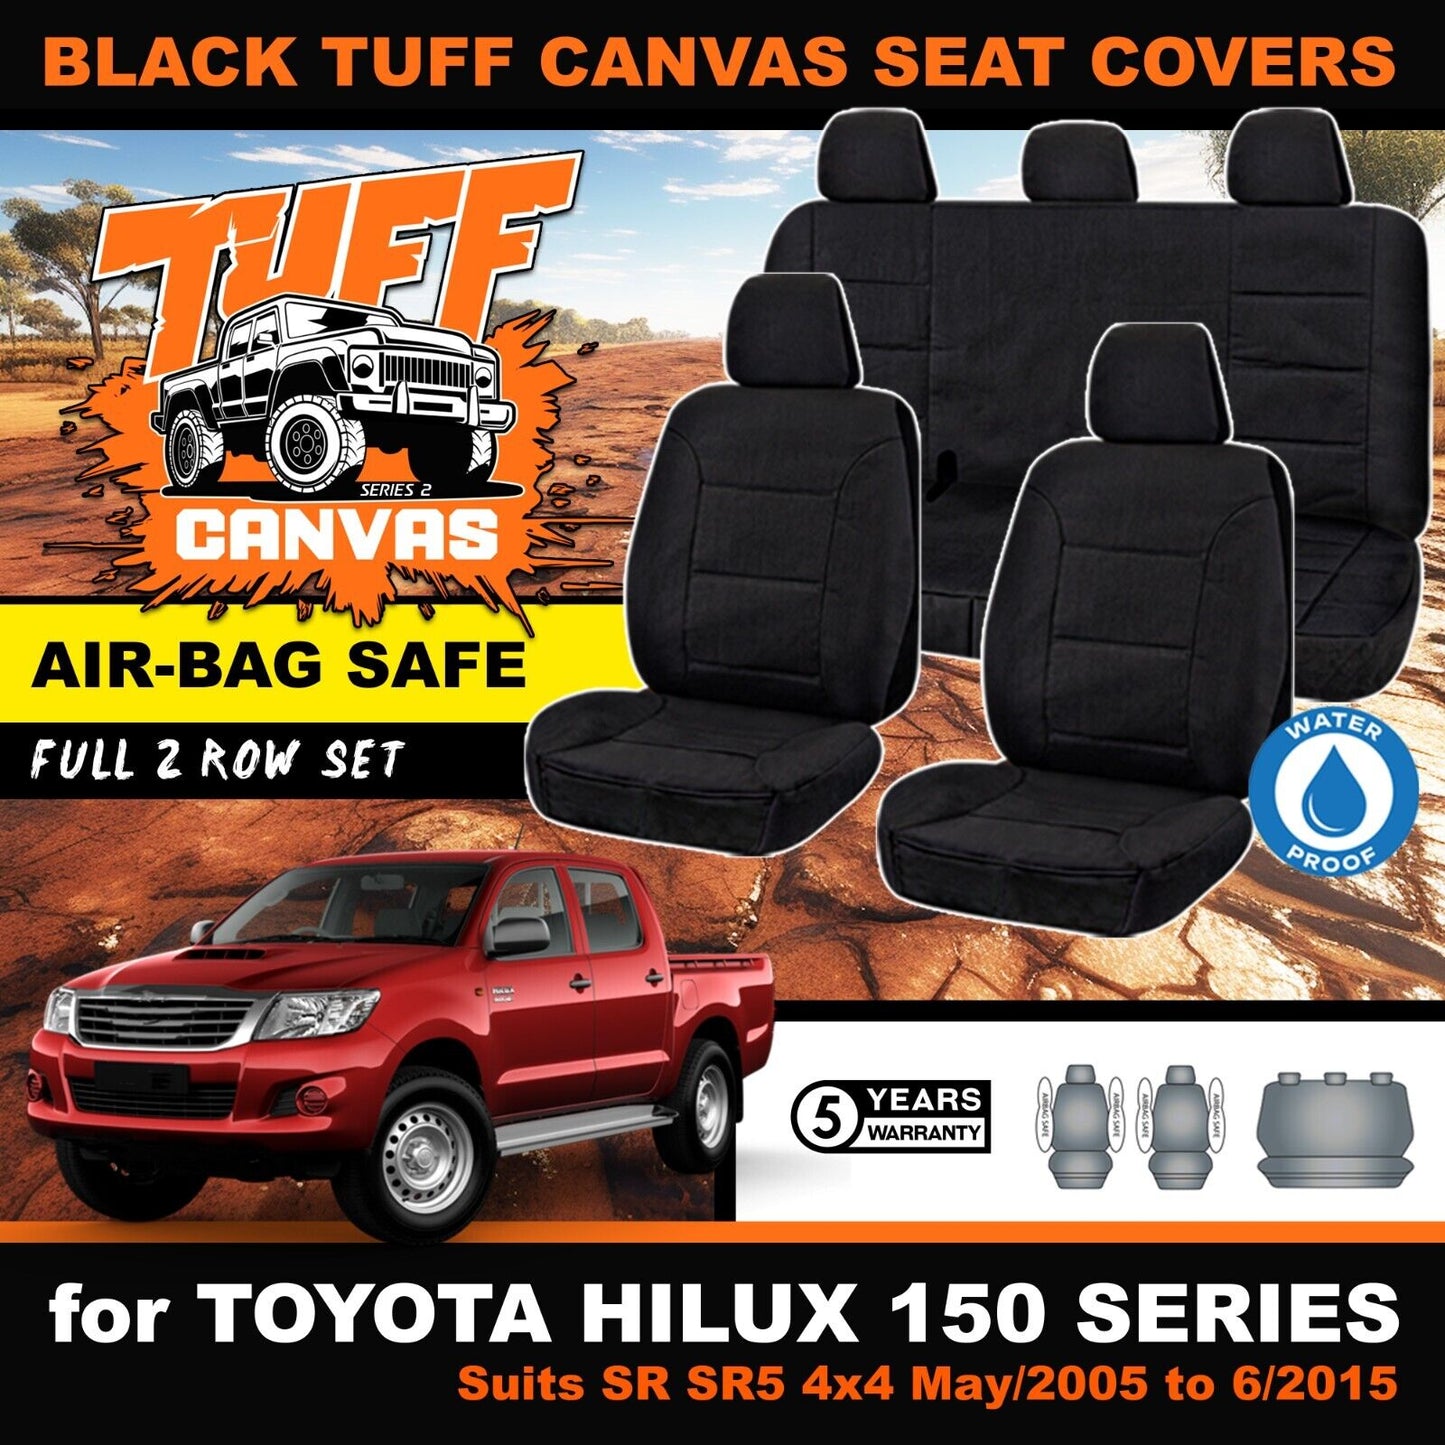 Black Tuff Canvas S2 Seat Covers 2 Rows For Toyota Hilux 150 SR5 SR Dual Cab 5/2005-2015